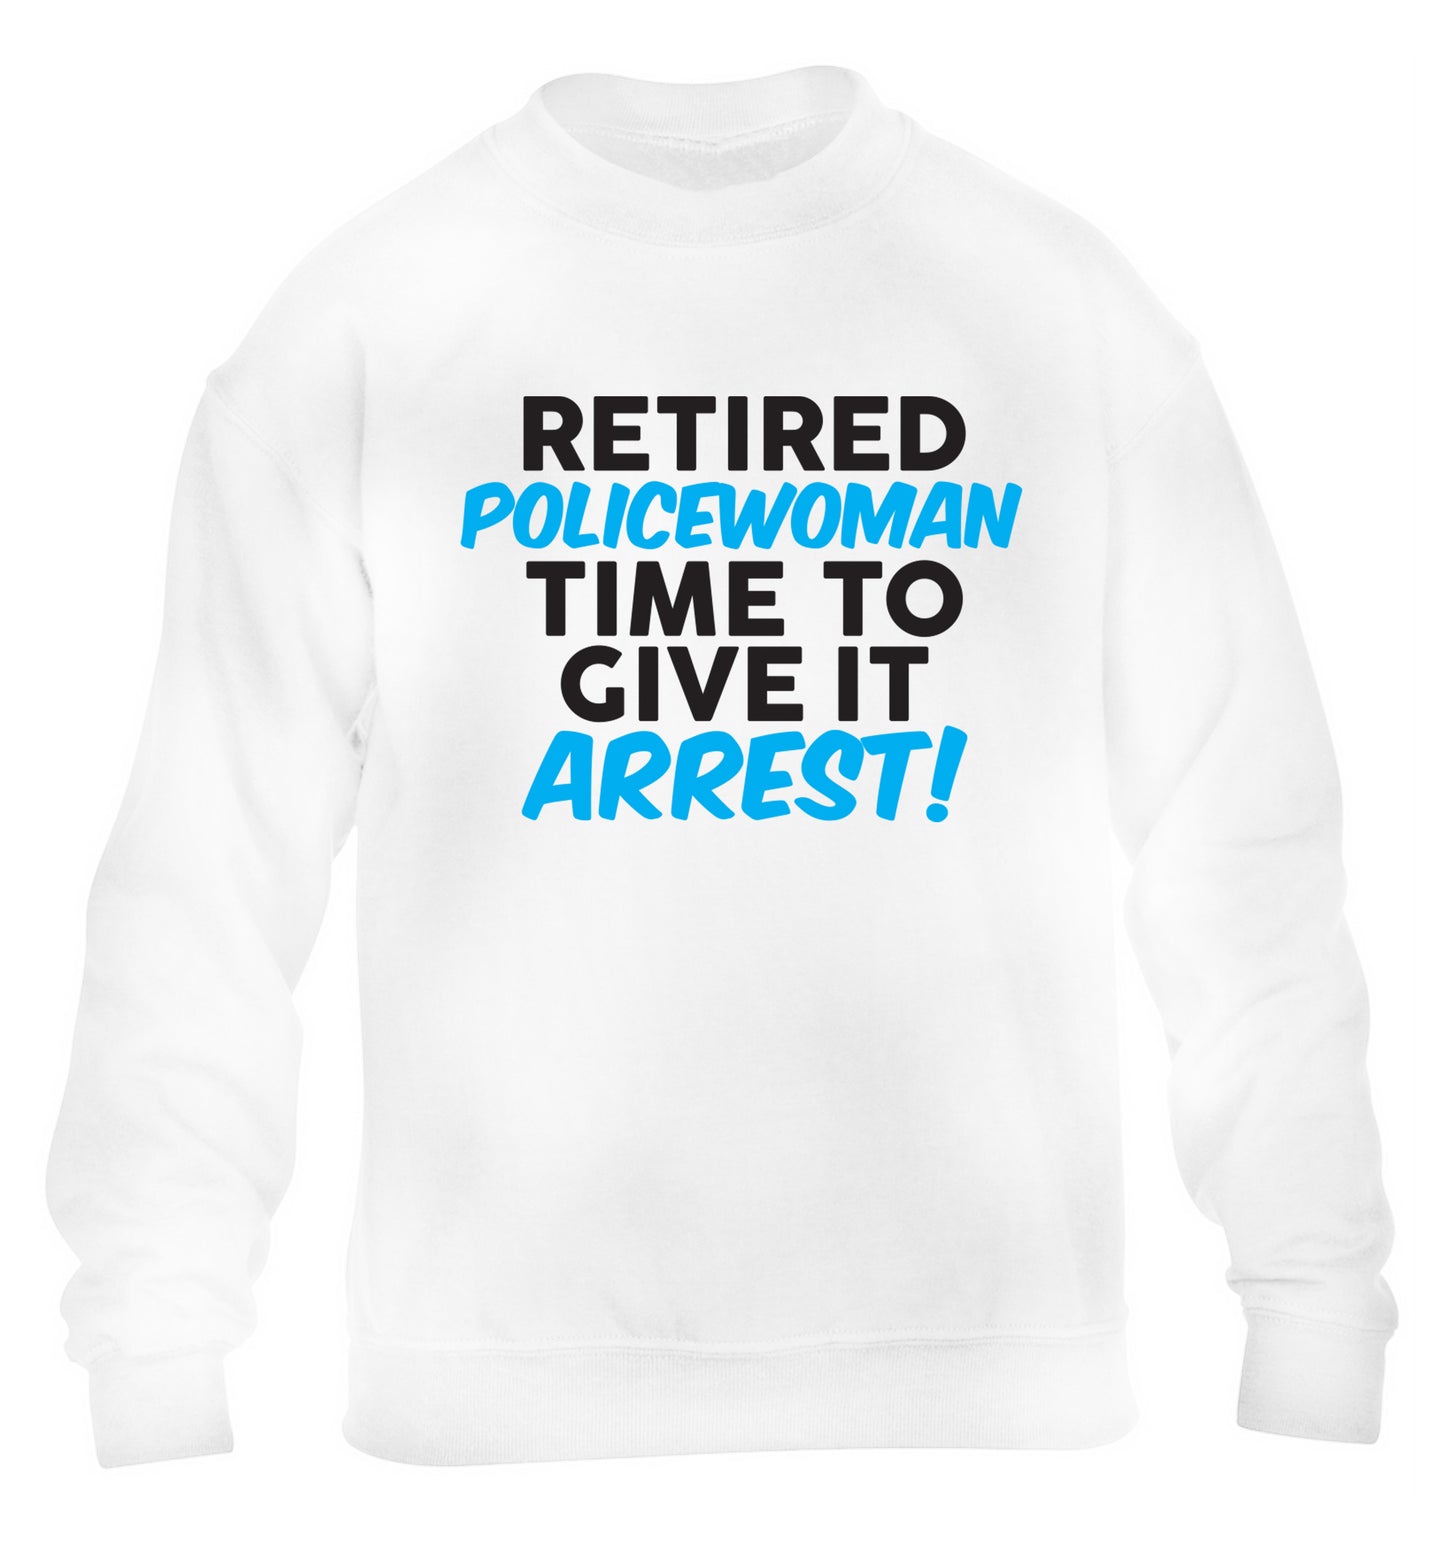 Retired policewoman time to give it arrest children's white sweater 12-13 Years